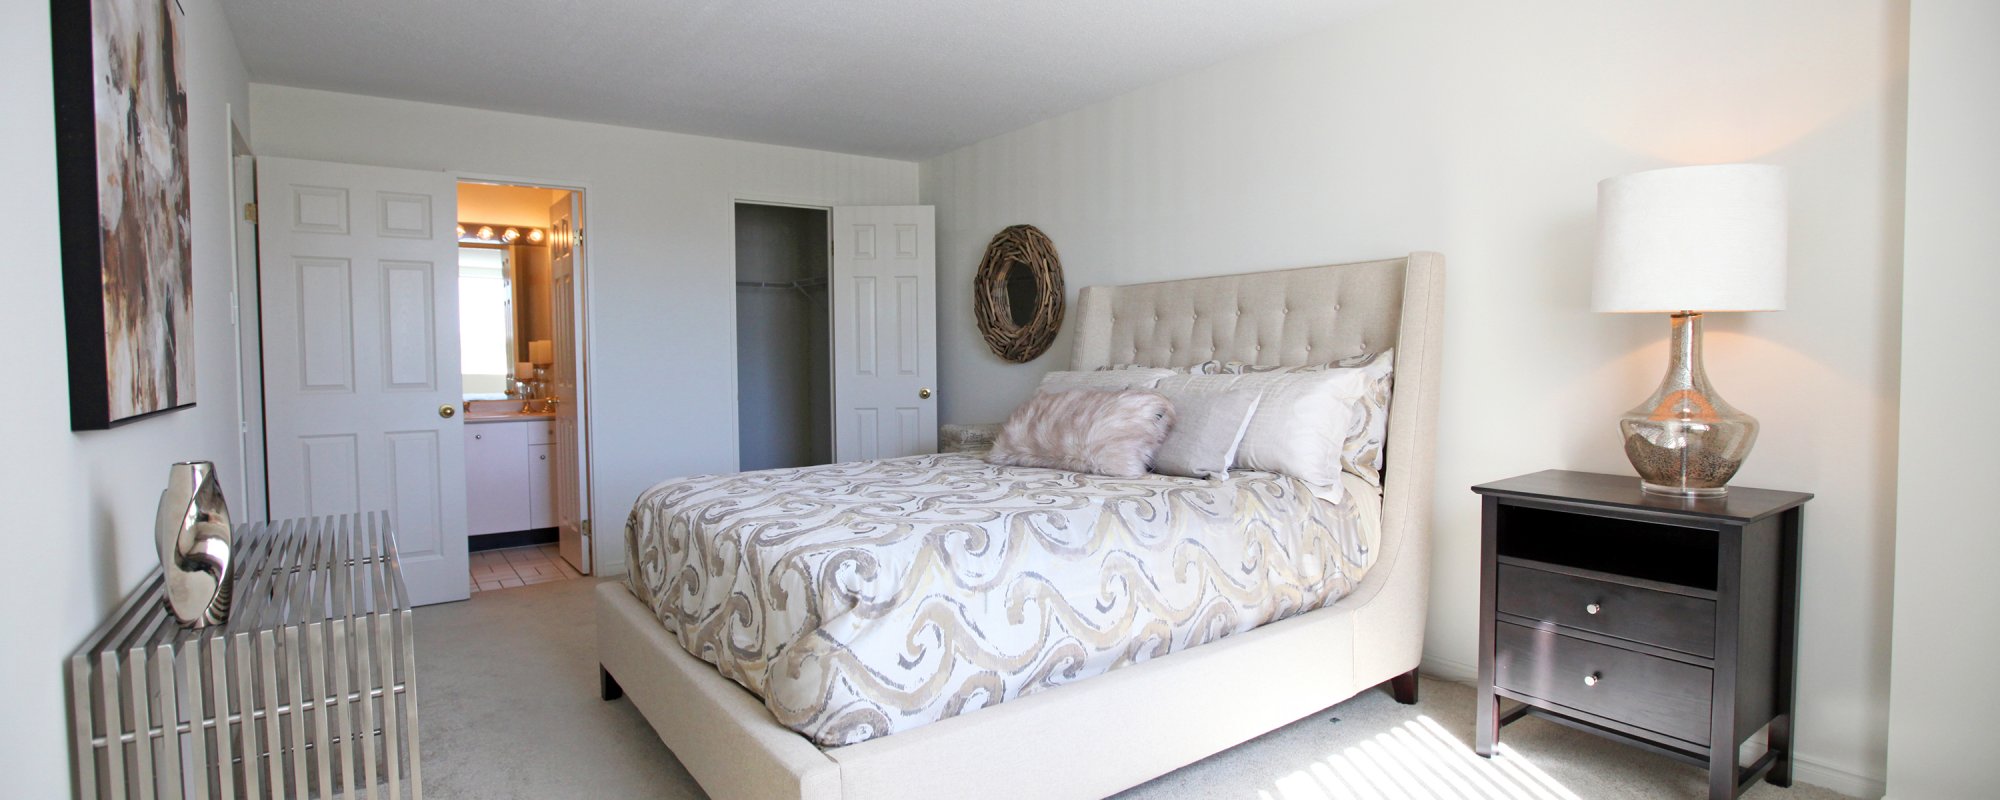 Bedroom in a luxury apartment in London, Ontario